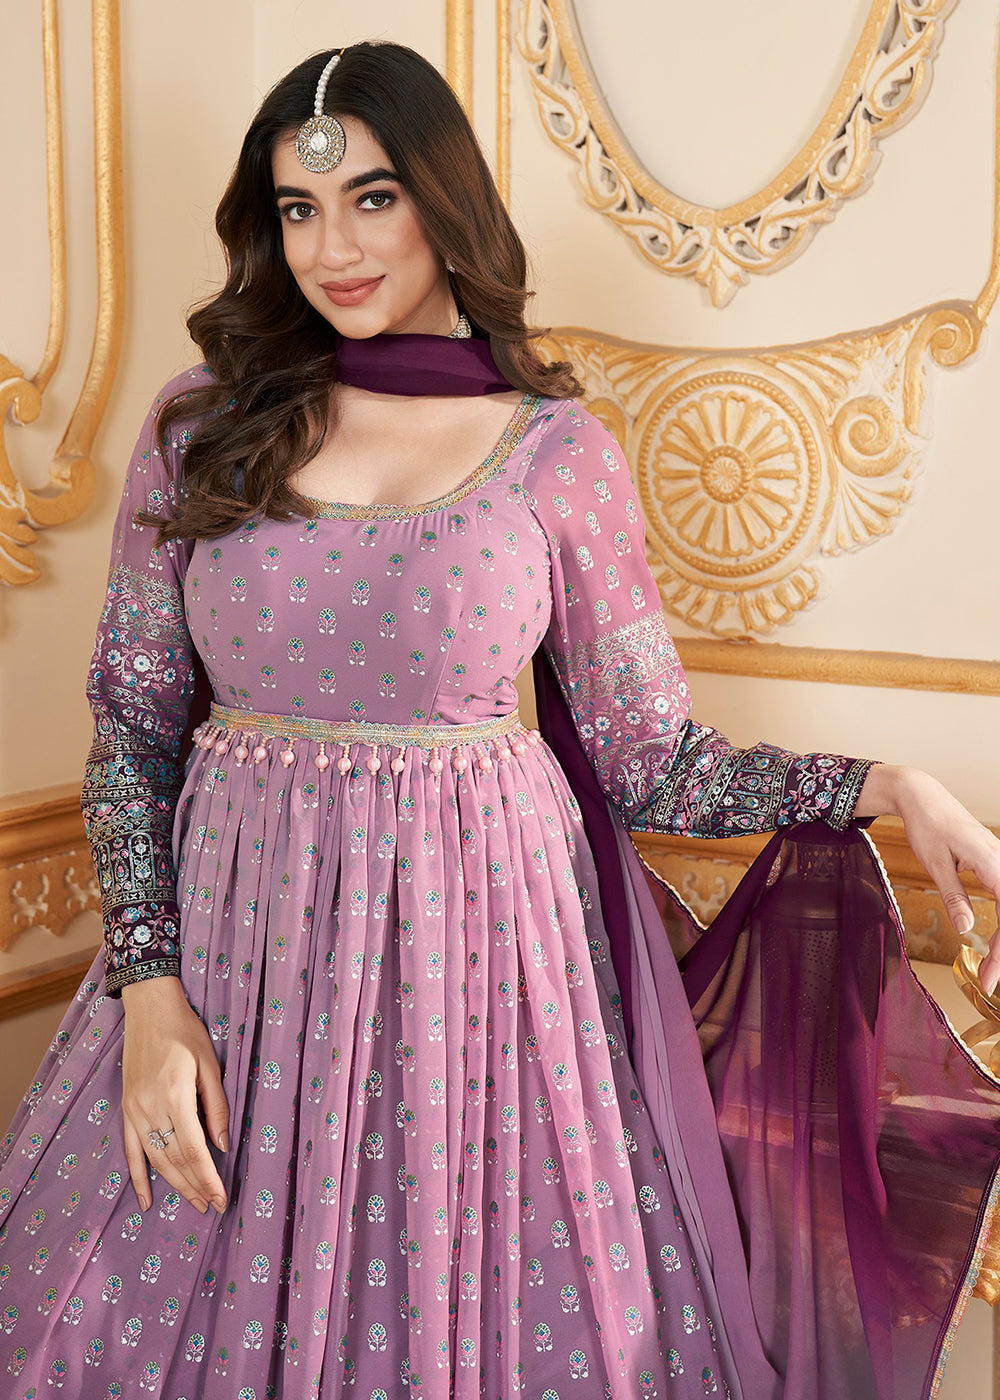 Buy Now Pink Metalic Foil Work Embroidered Wedding Festive Anarkali Gown Online in USA, UK, Australia, Canada & Worldwide at Empress Clothing.